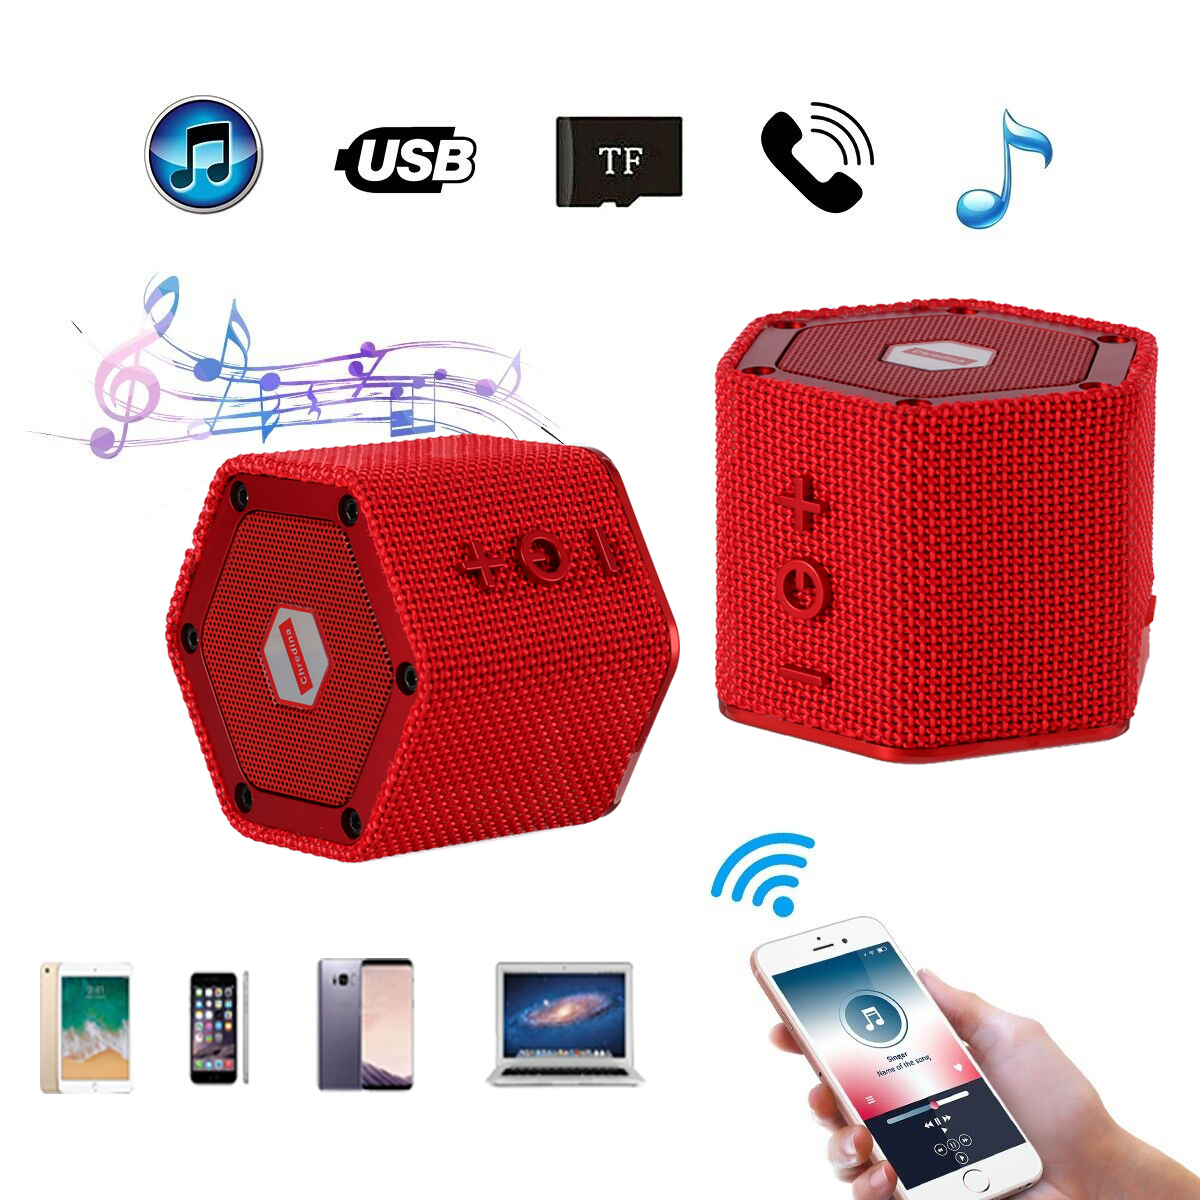 Speakers-Bluetooth-Speaker-Fully-Waterproof-Certified-IP68-Floating-Speaker-for-Indoor-and-Outdoor-Use-Perfect-For-The-Beach-Pool-Or-Shower-13